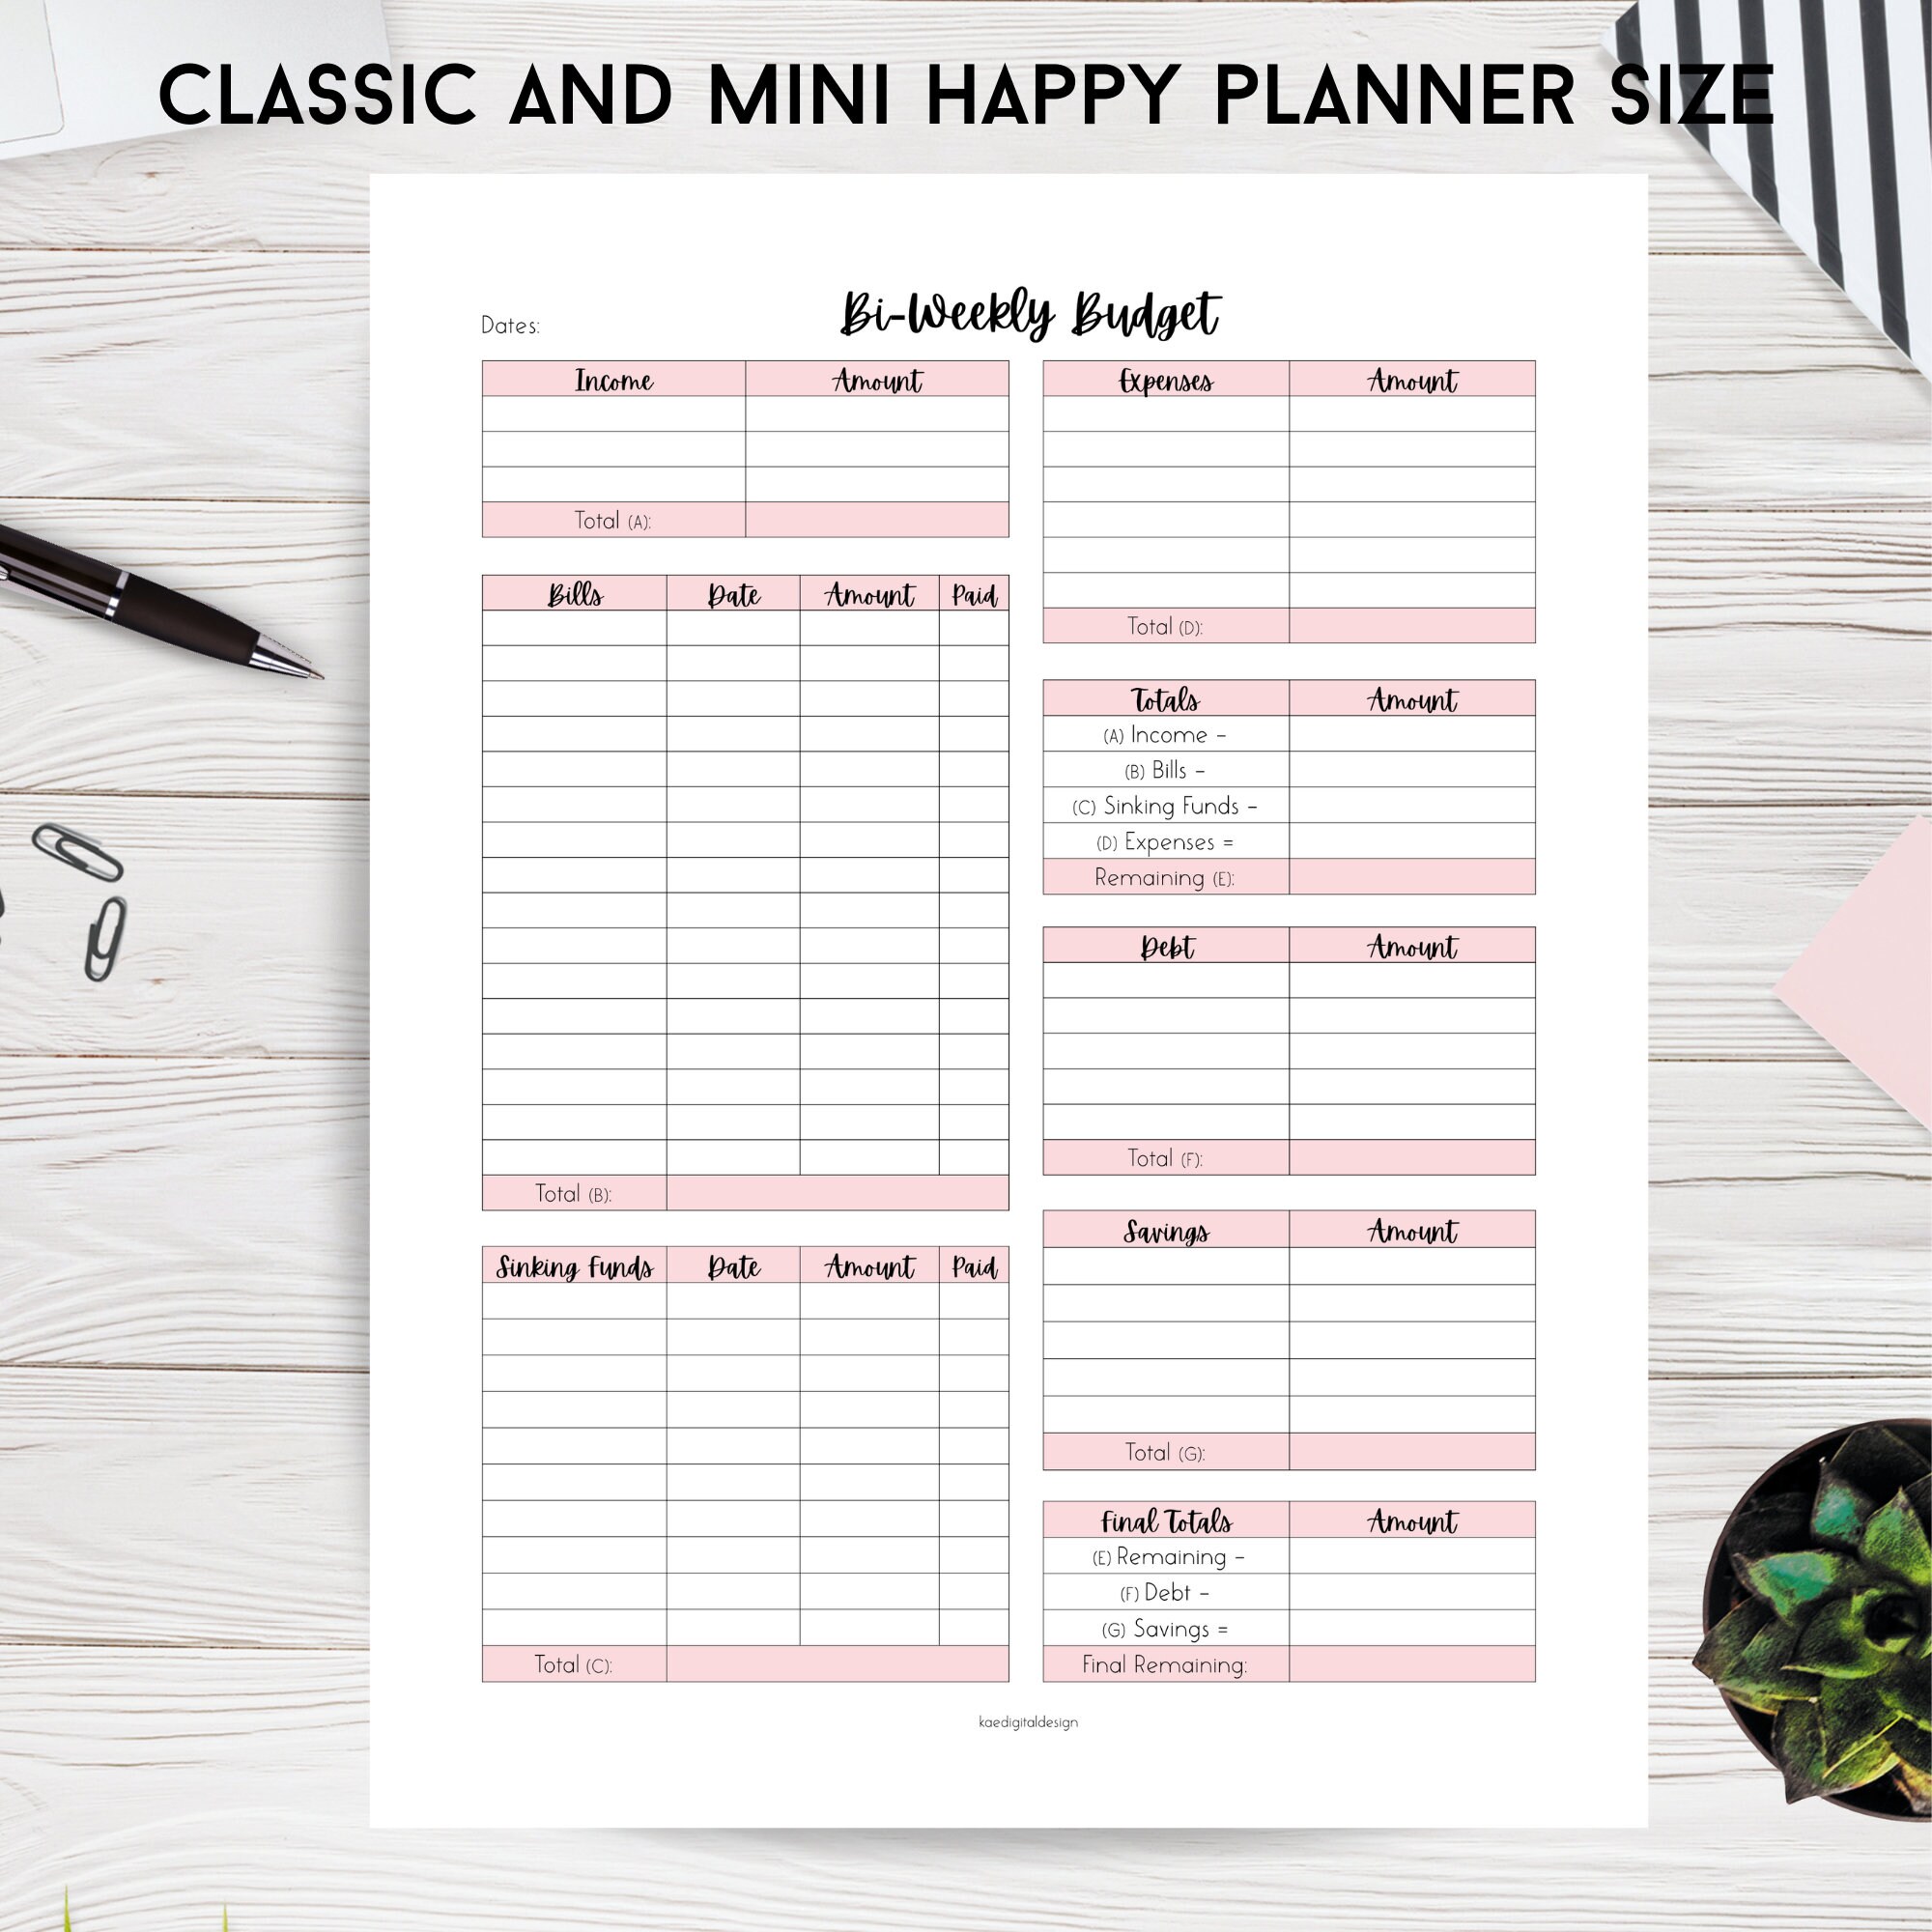 Classic Happy Planner Bi Weekly Budget Classic Happy Planner Etsy